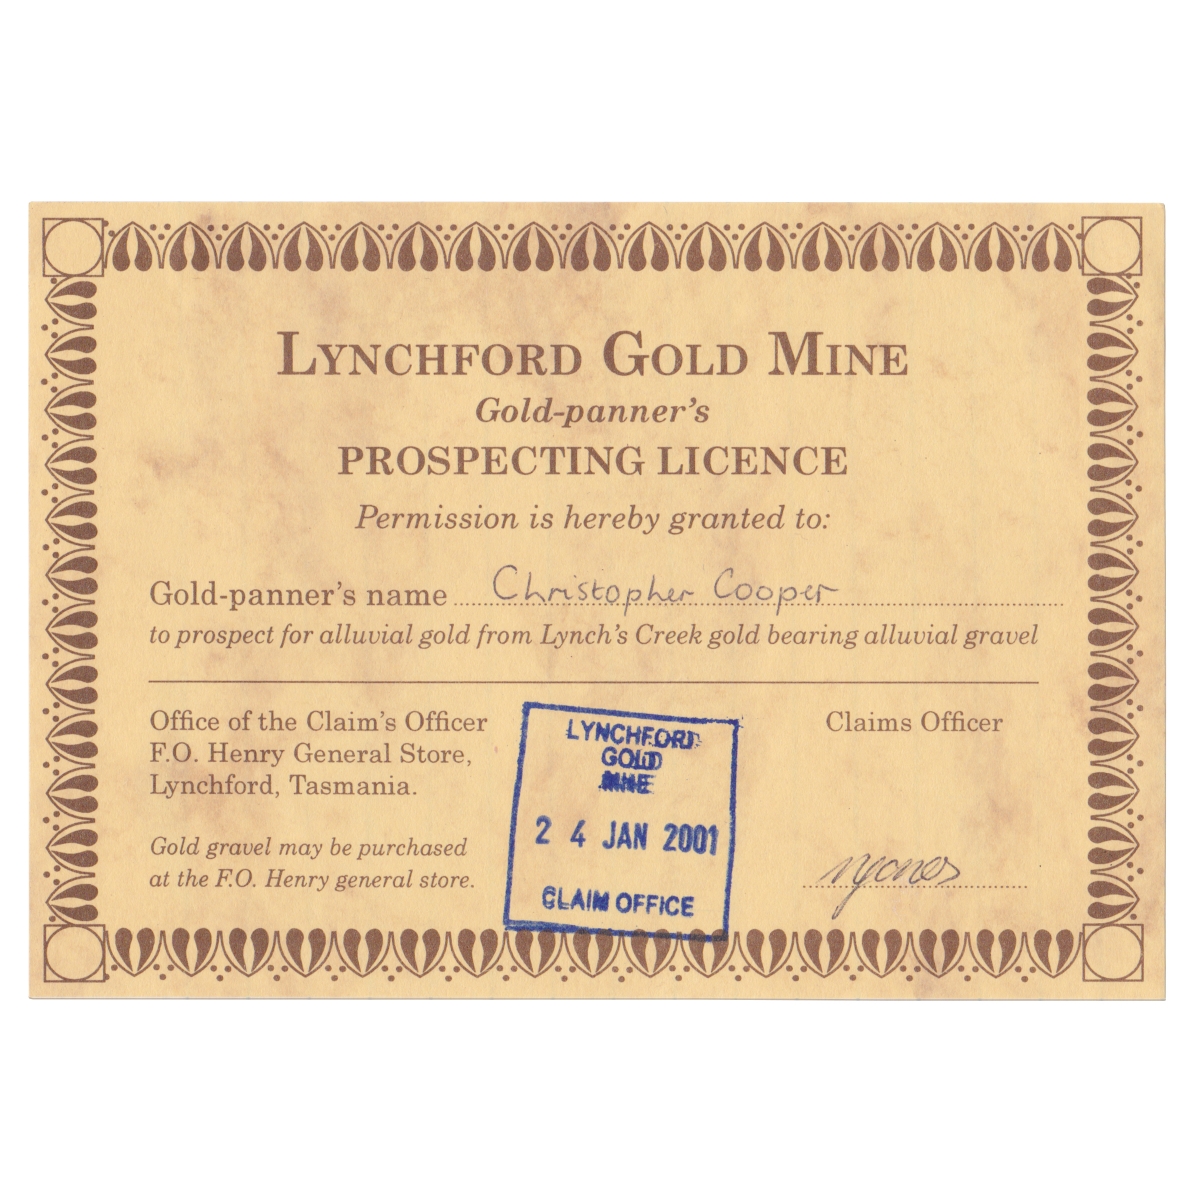 A fictional gold-panner's license.